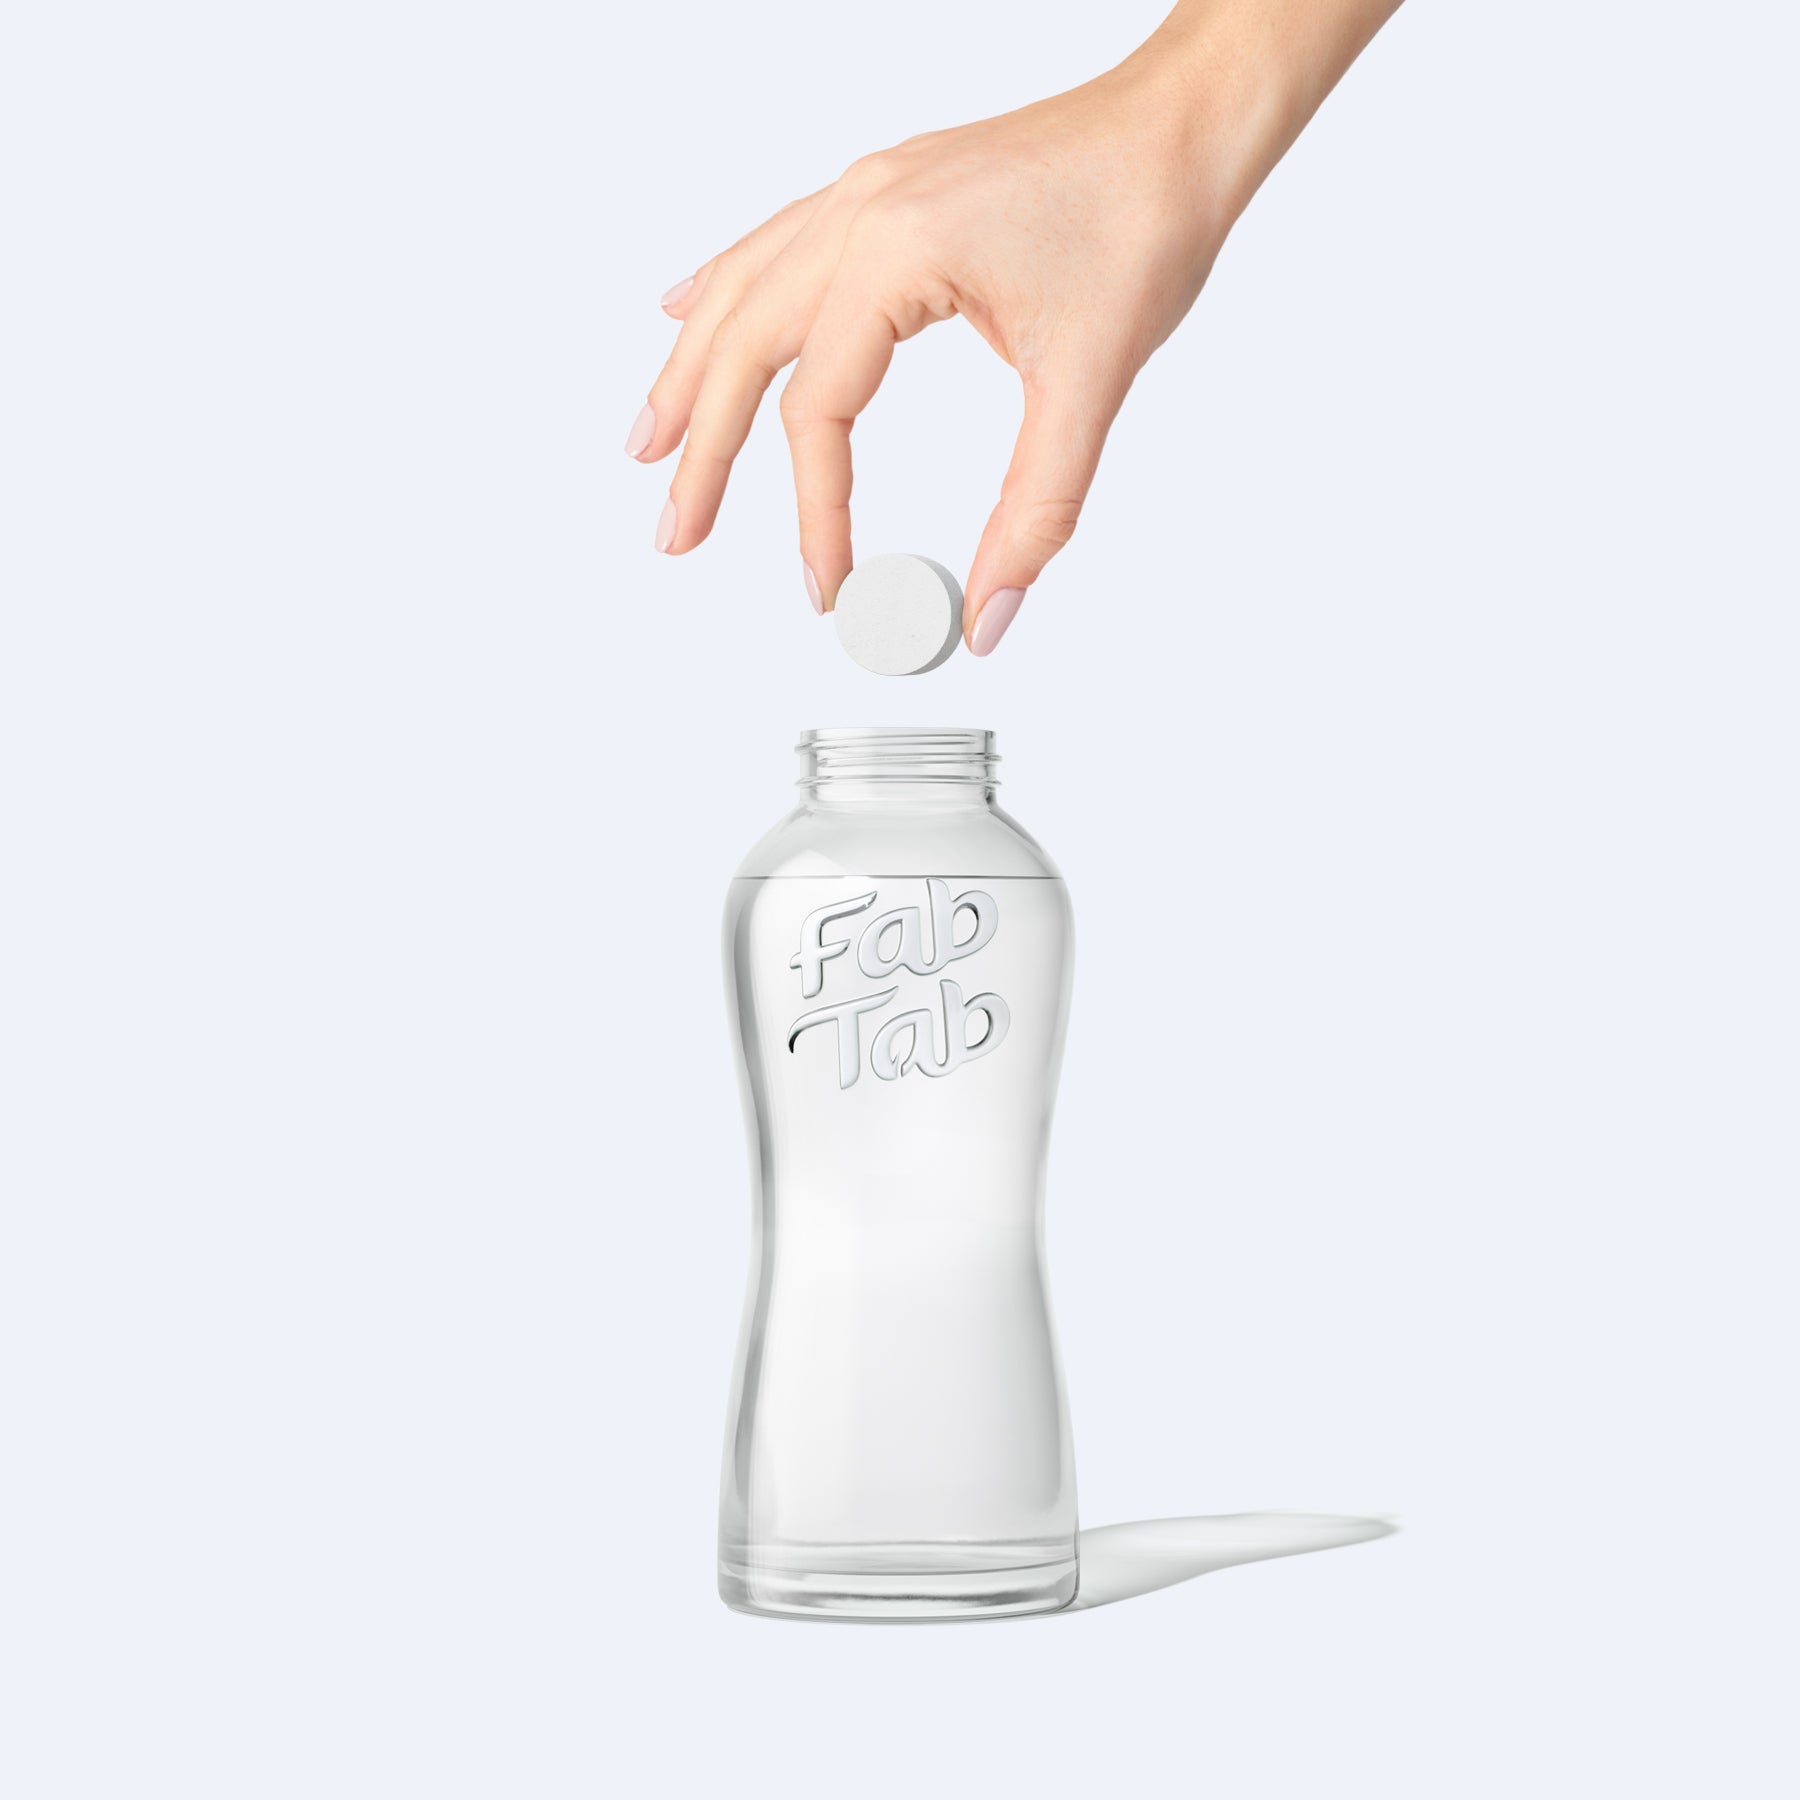 Load video: &lt;p&gt;Fill the FabTab Infinity Glass Bottle with lukewarm water to the fill line. Drop in the tablet and allow for about 30 minutes as it dissolves.&lt;/p&gt;